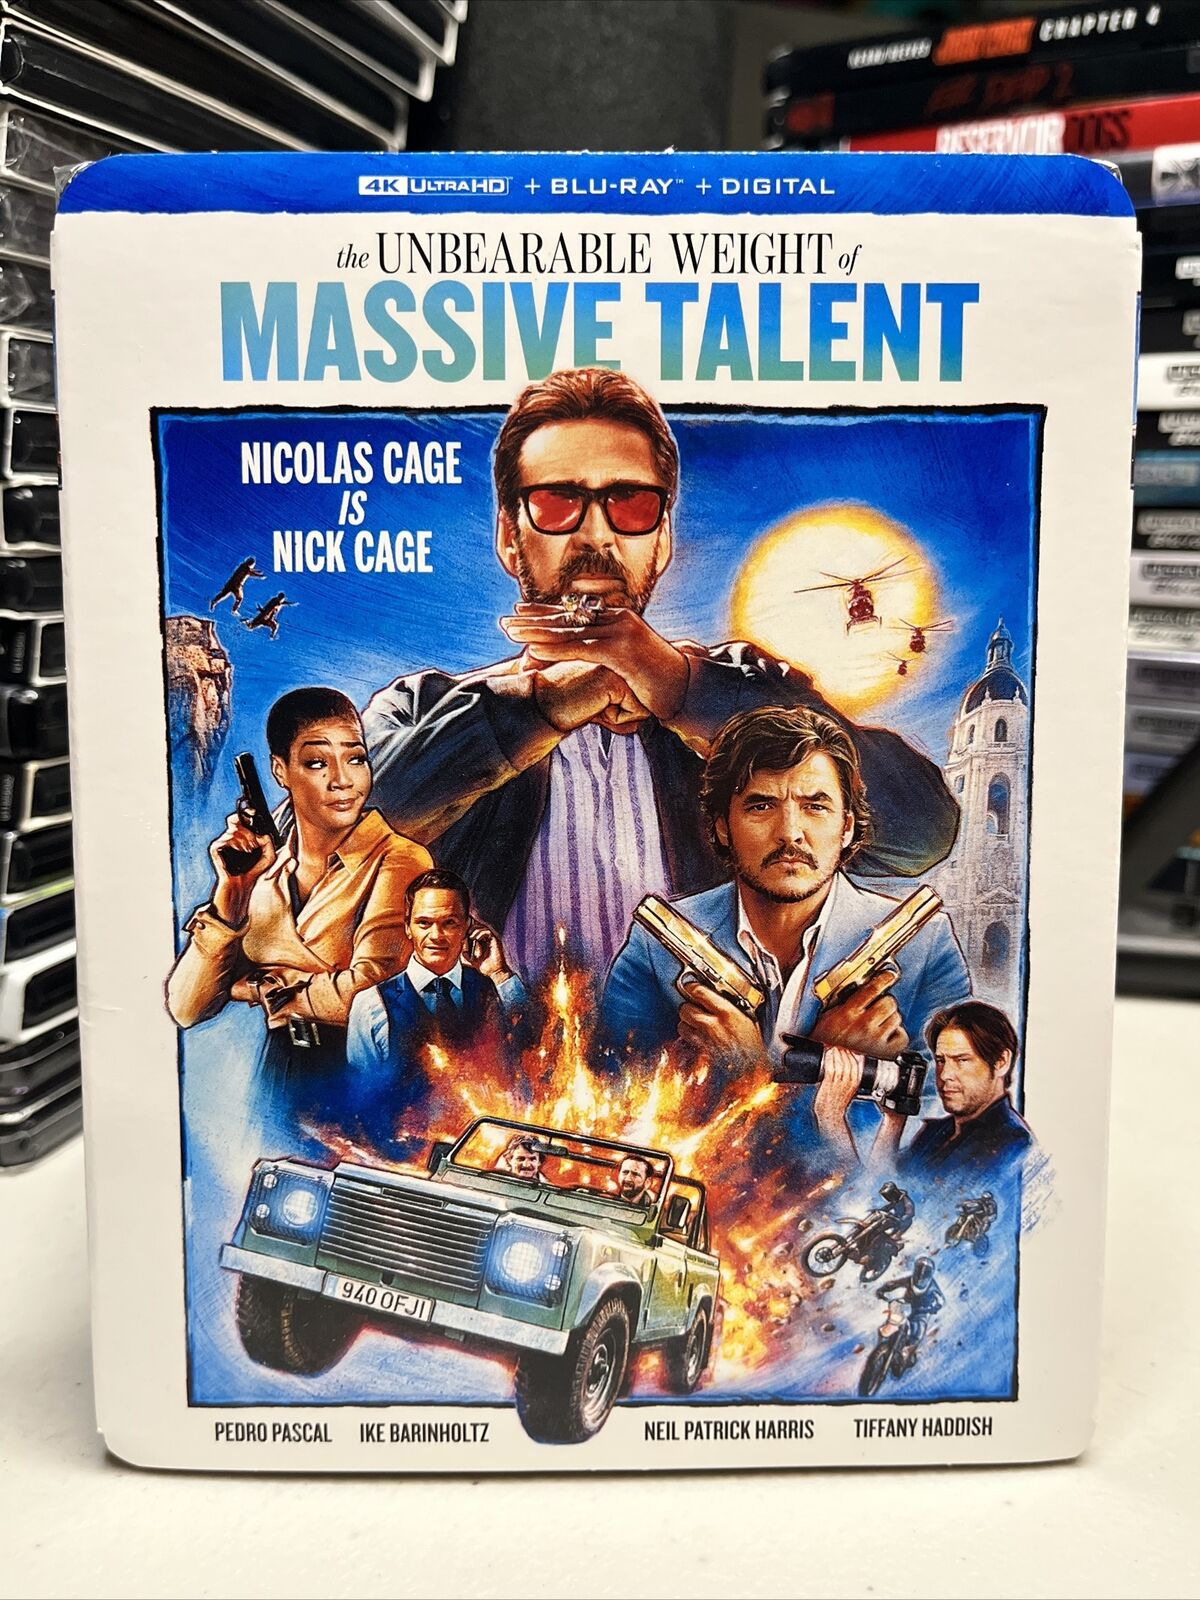 The Unbearable Weight of Massive Talent (4K Blu-ray)